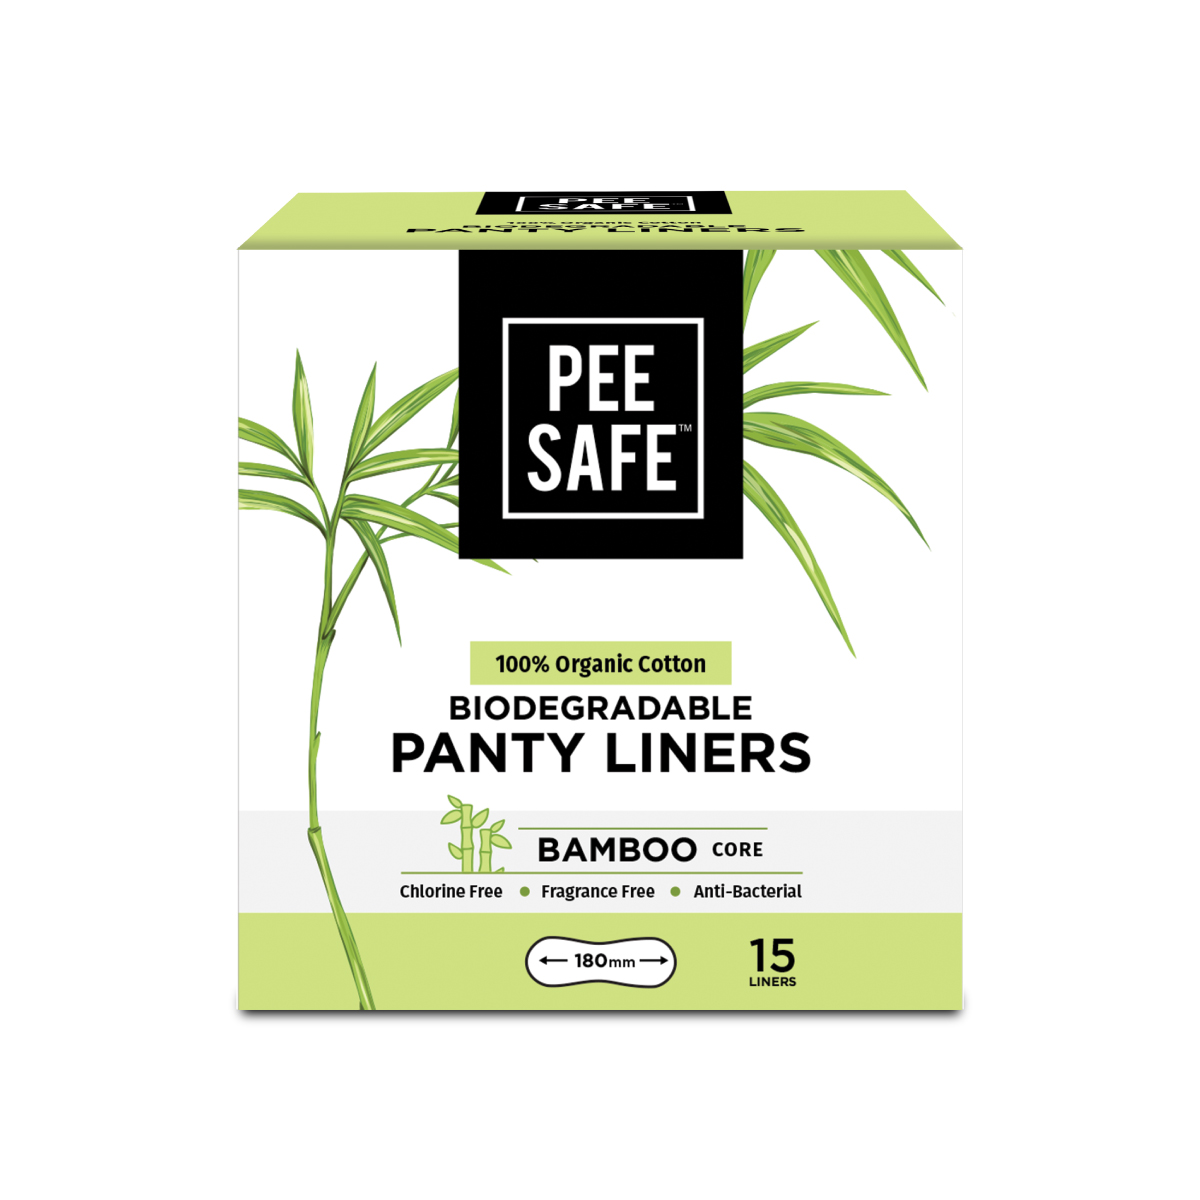 Pee Safe 100% Organic Cotton, Biodegradable Panty Liners - Pack Of 15 